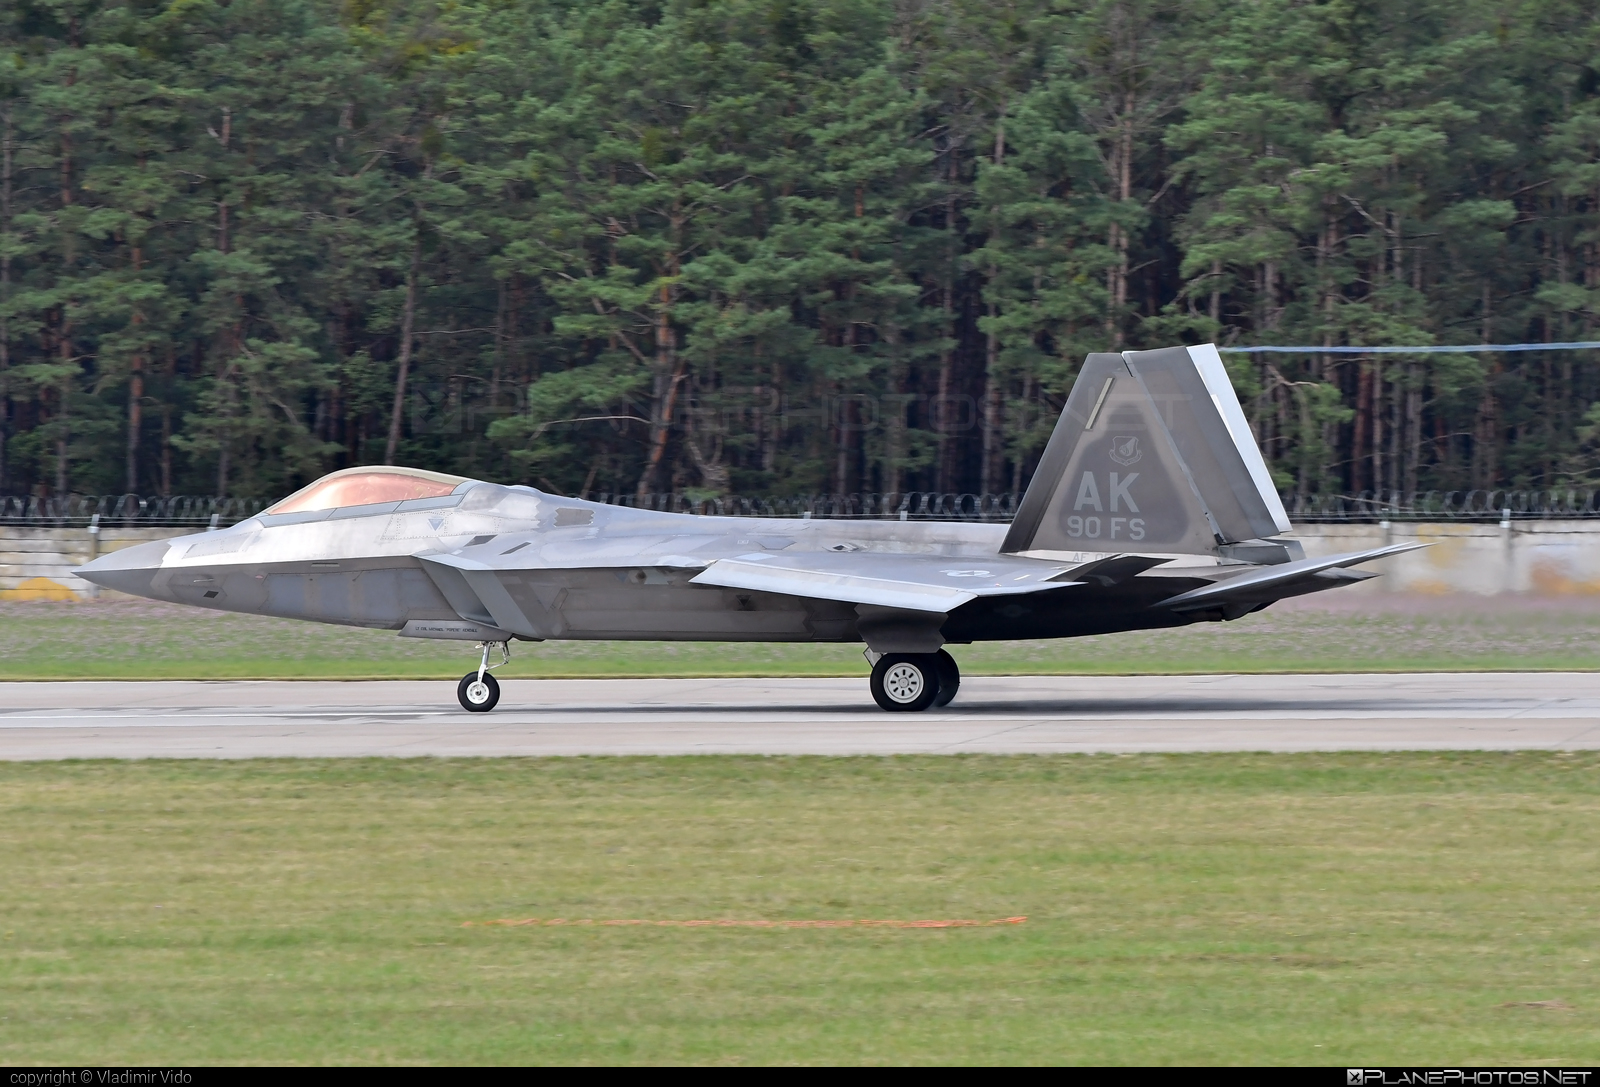 Lockheed Martin F-22A Raptor - 05-4090 operated by US Air Force (USAF) #LockheedMartin #f22 #f22a #f22aRaptor #f22raptor #lockheedMartinF22 #lockheedMartinRaptor #raptor #usaf #usairforce